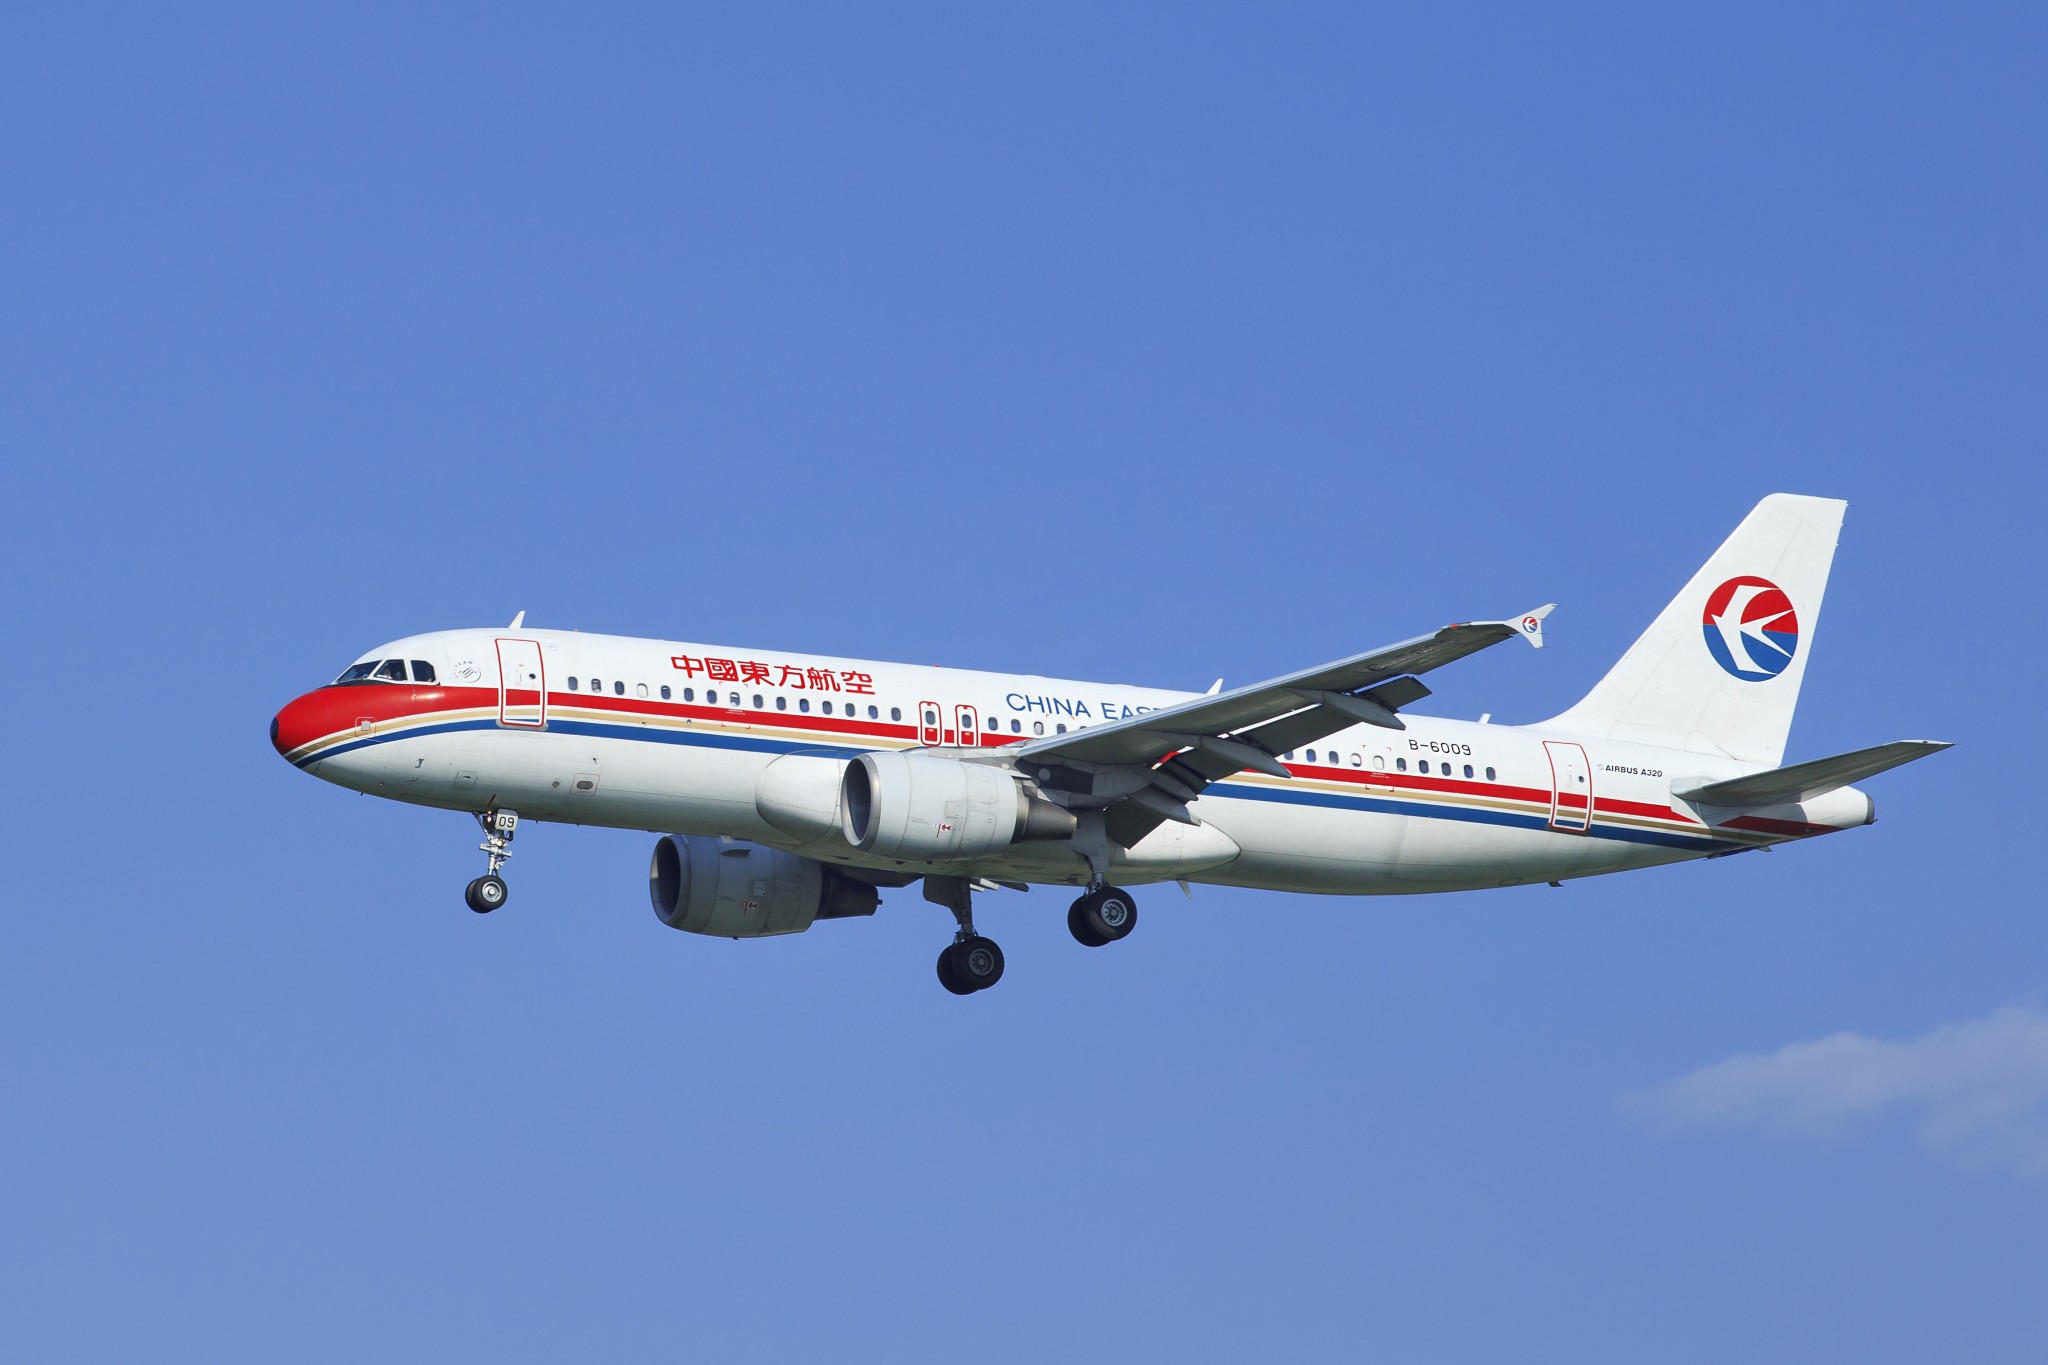 Japan Airlines and China Eastern Airlines aim to apply for joint business agreement